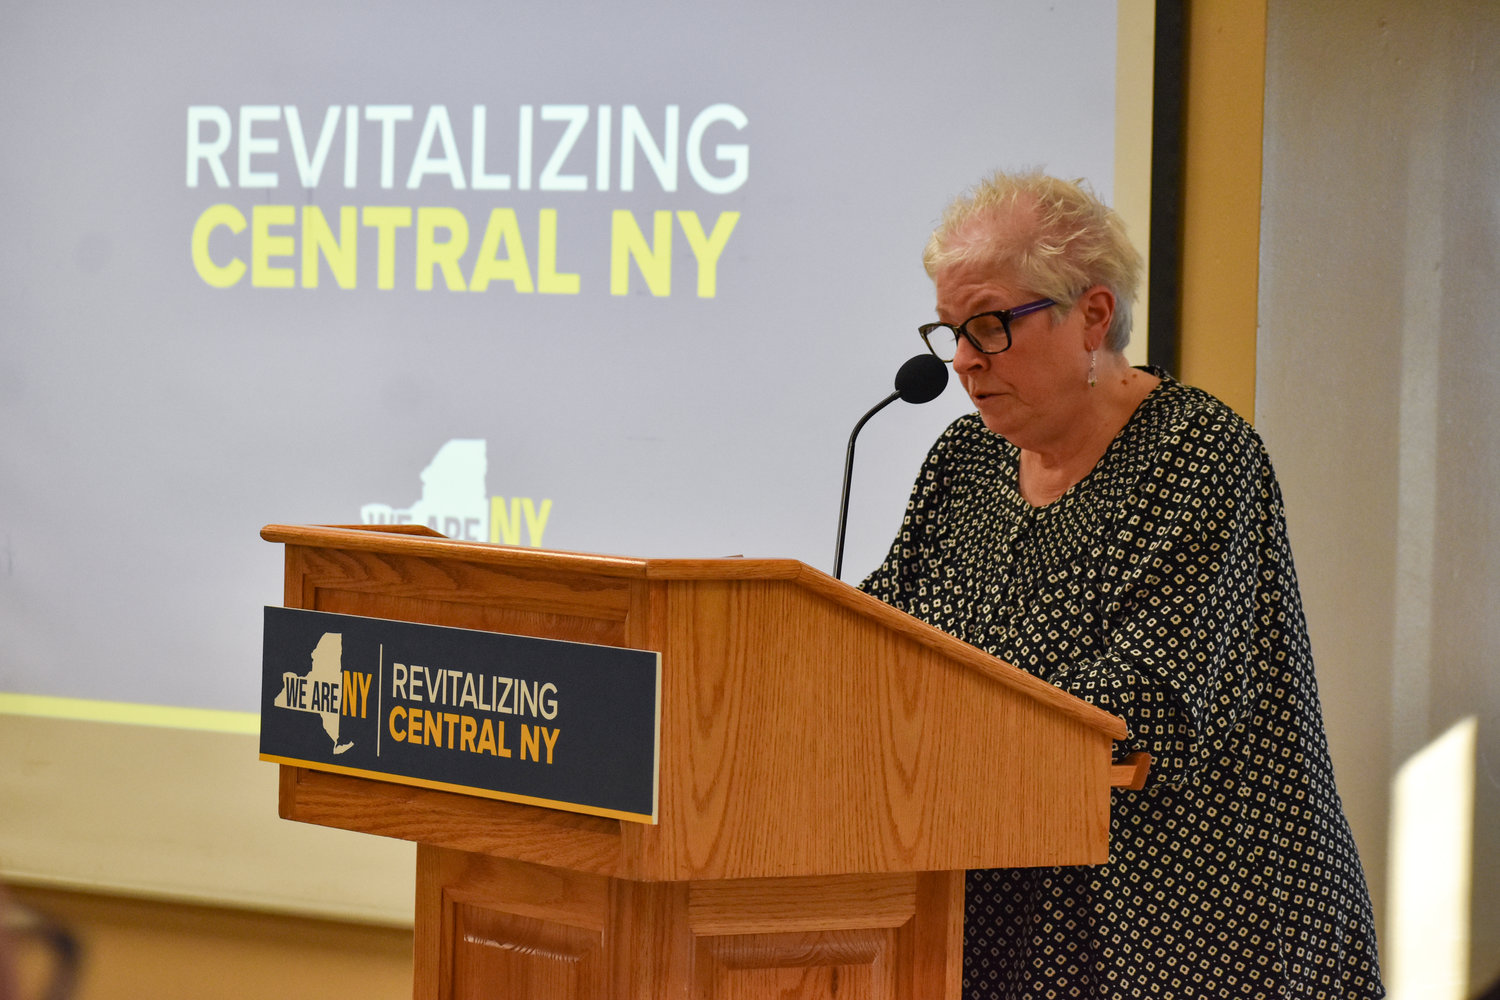 Oneida Mayor Helen Acker shares remarks in the Southwest Community Center in Syracuse after it was just announced which Oneida projects will move forward as part of its Downtown Revitalization.